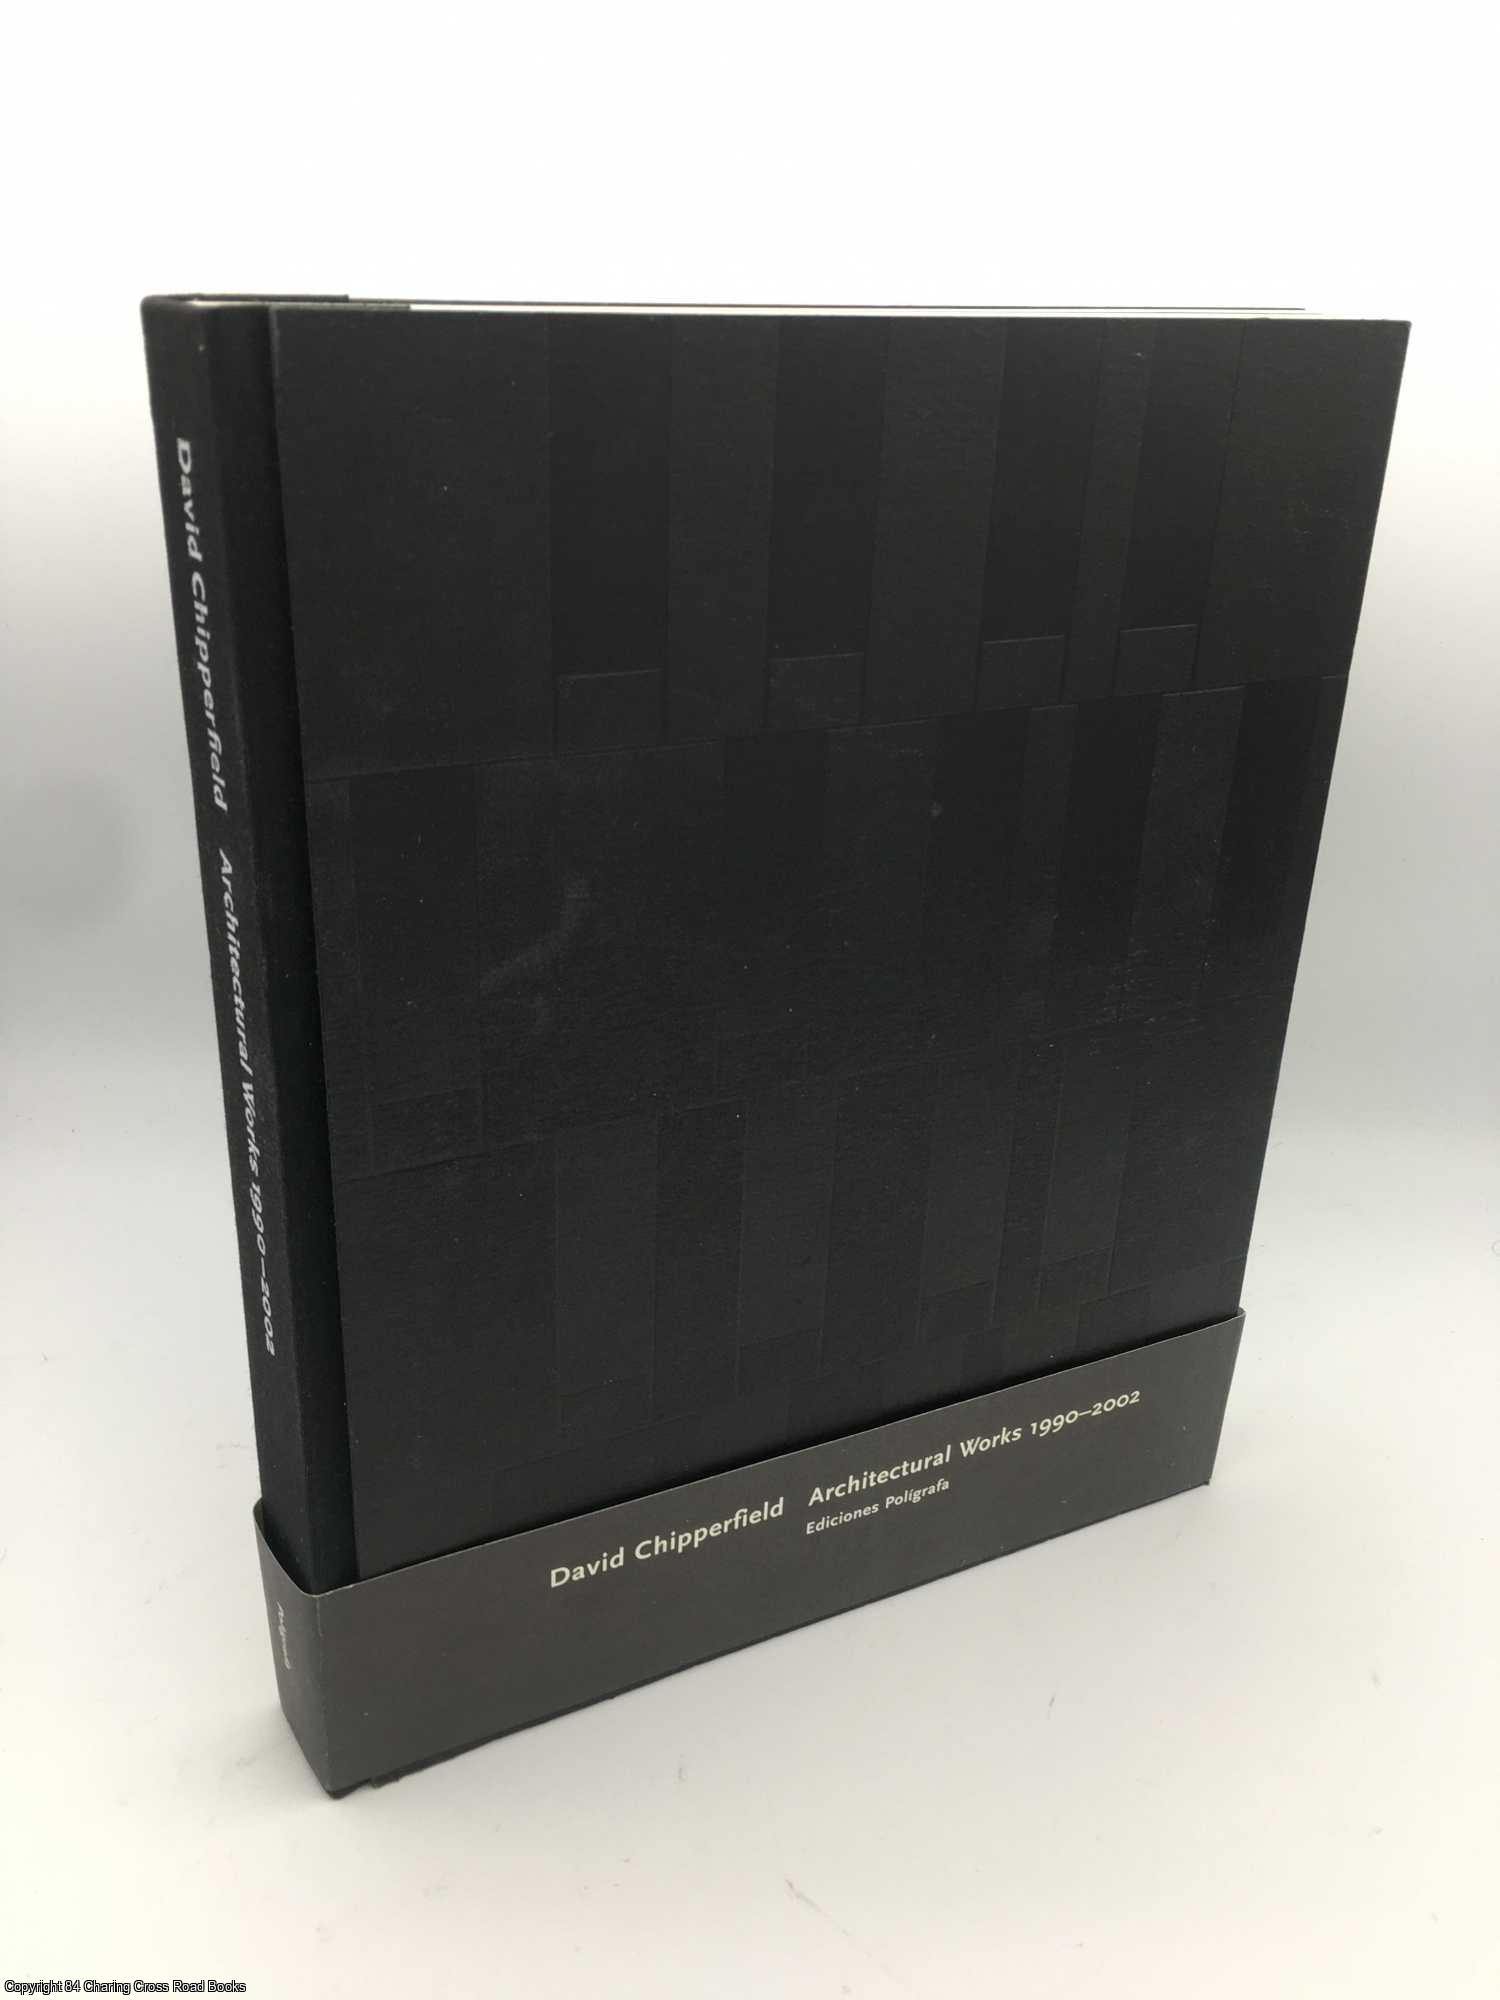 Weaver, Thomas (ed.) - David Chipperfield: Architectural Works 1990-2002